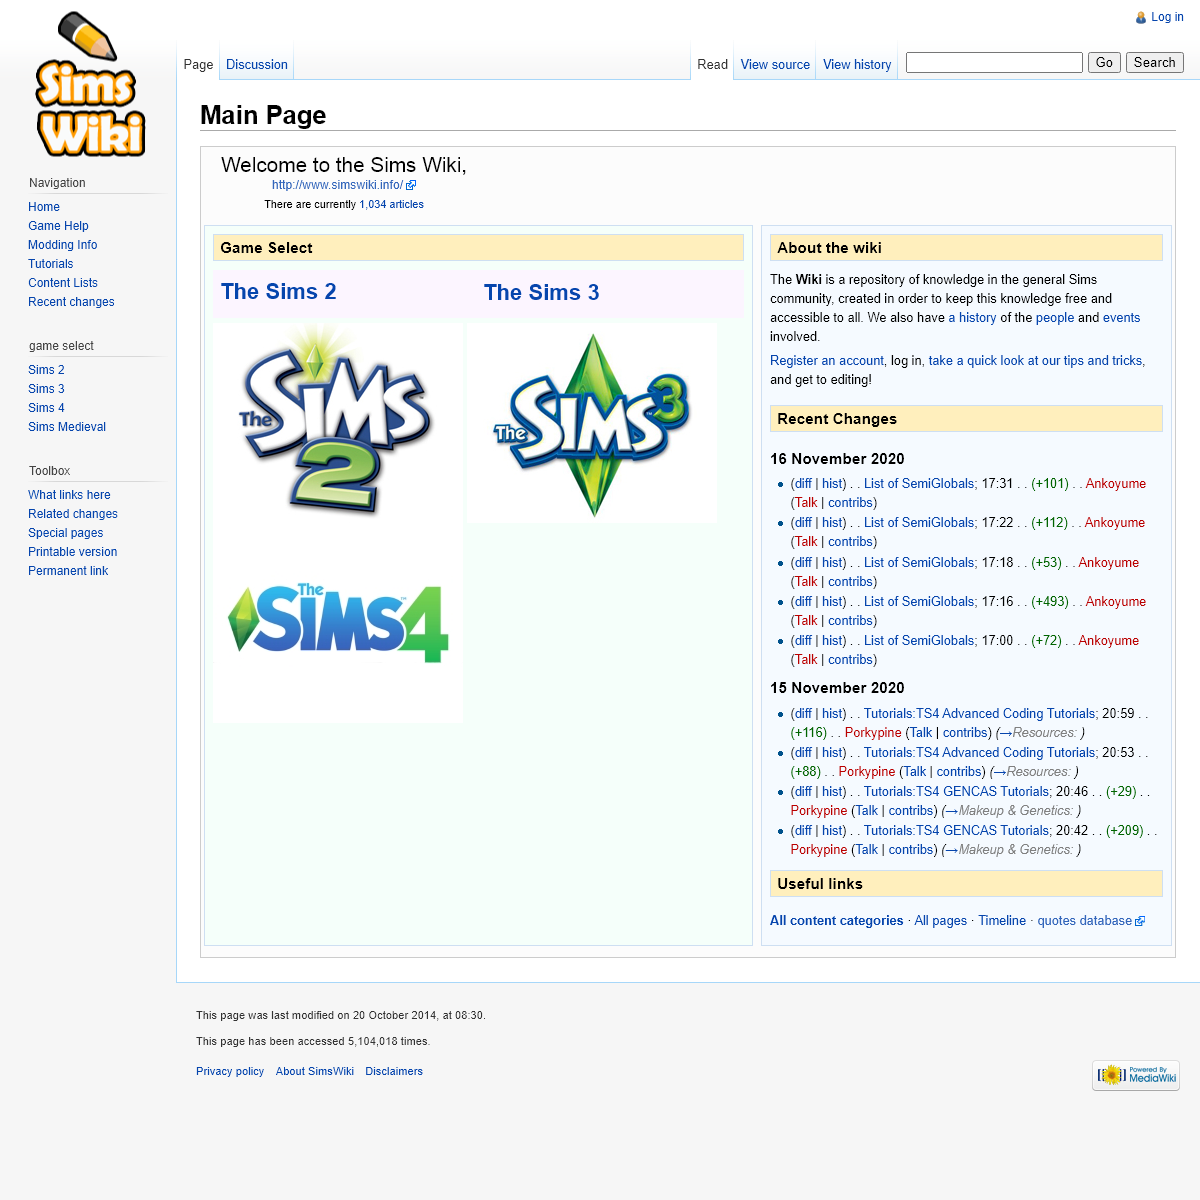 A complete backup of simswiki.info